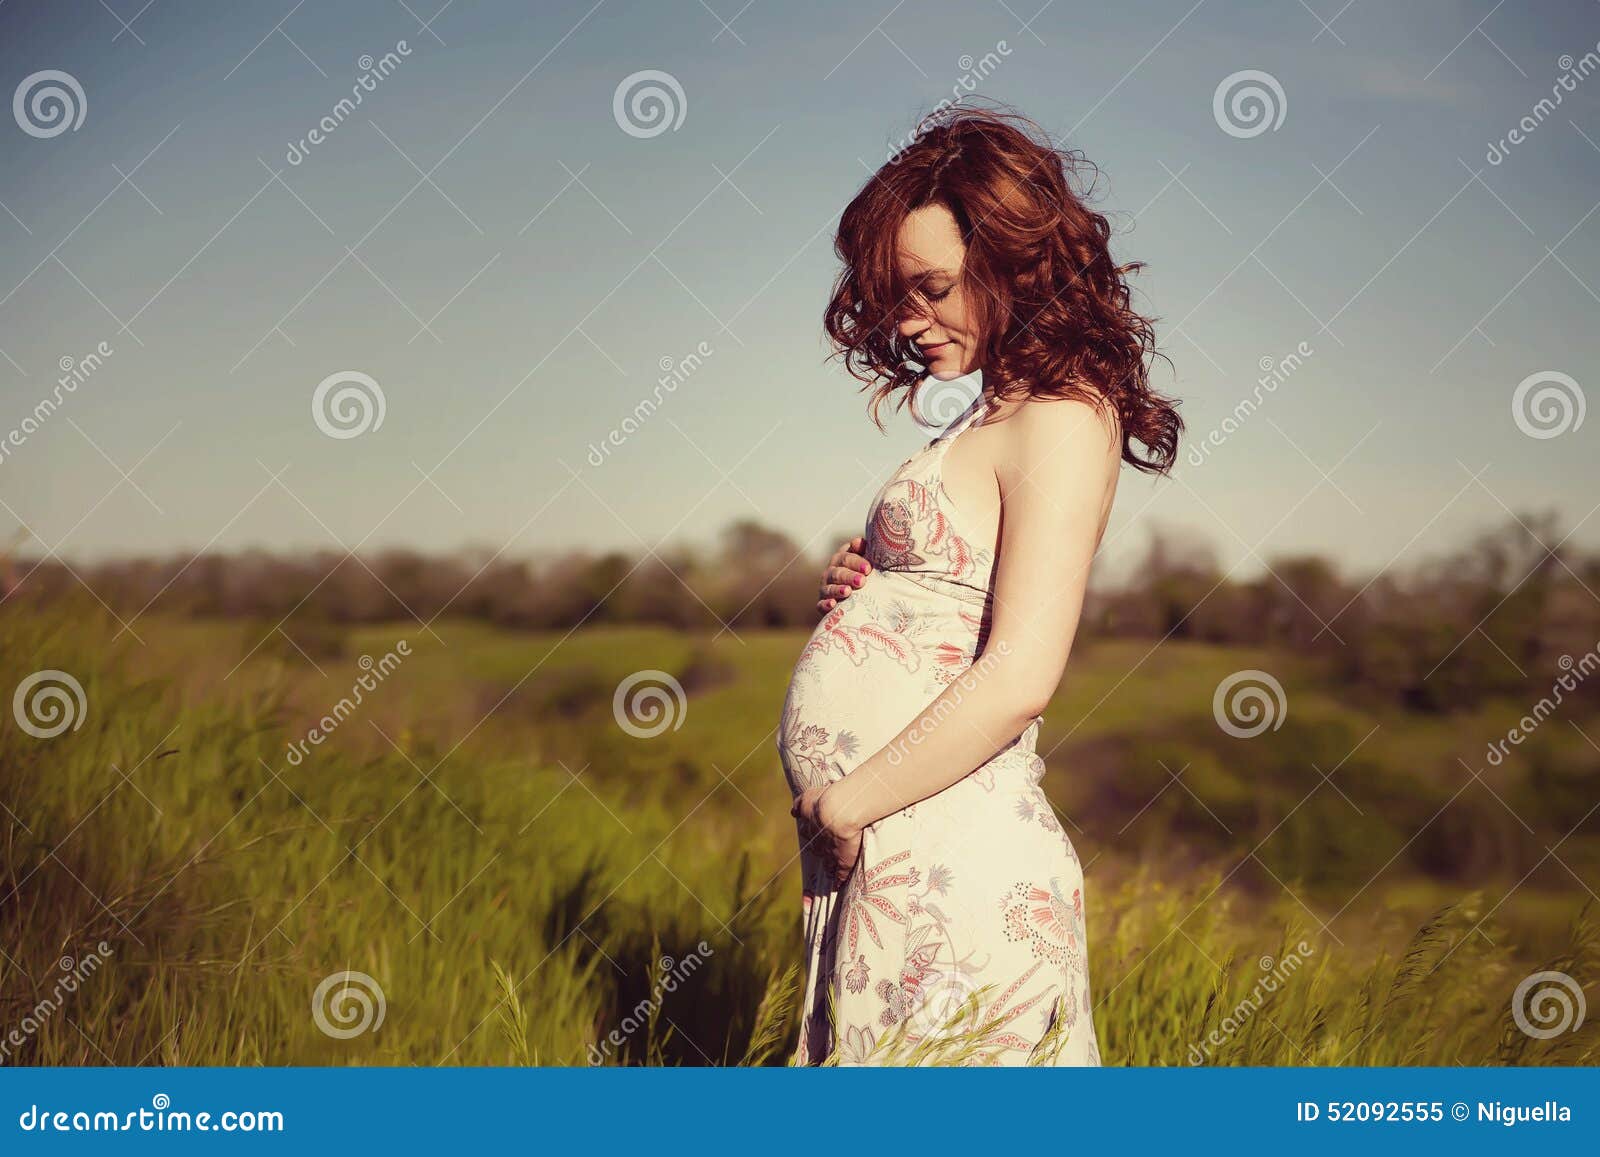 young happy pregnant woman relaxing and enjoying life in nature.